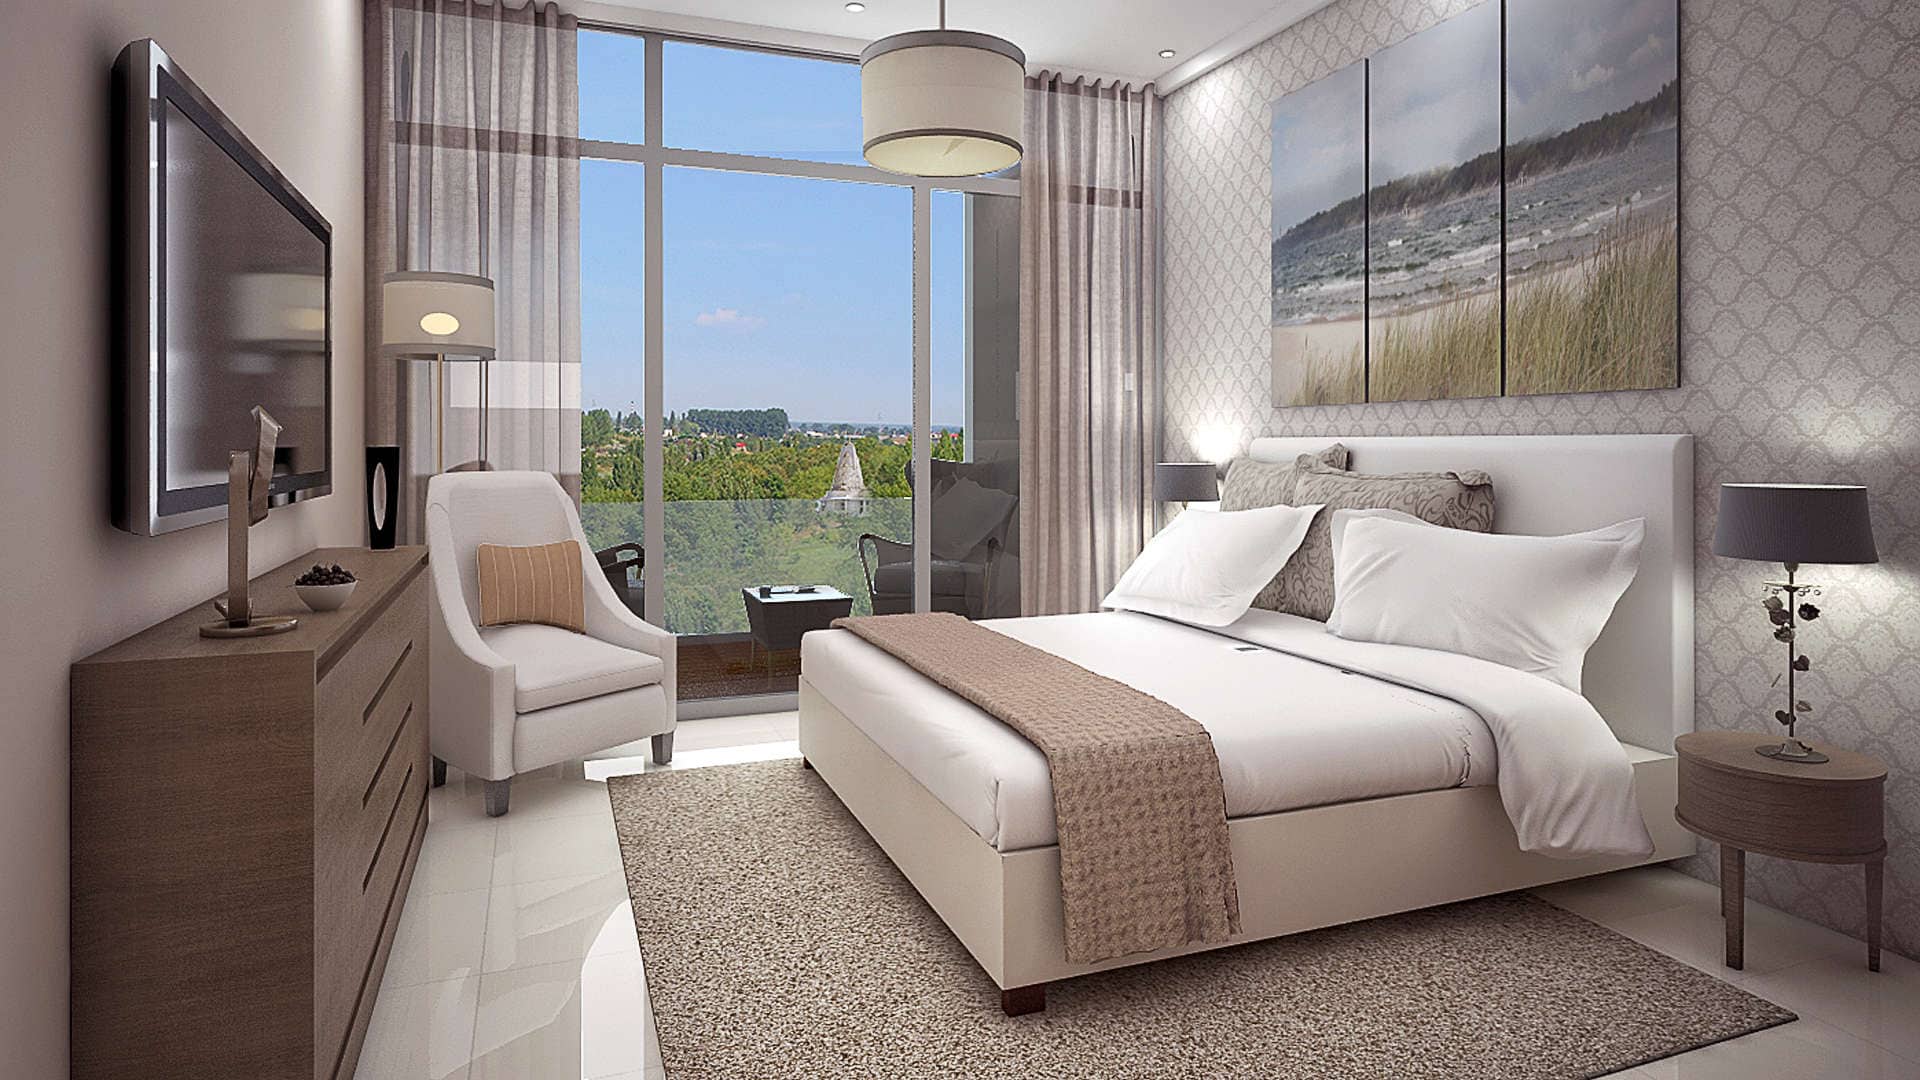 Bedroom Interior View 3D Architectural Visualization